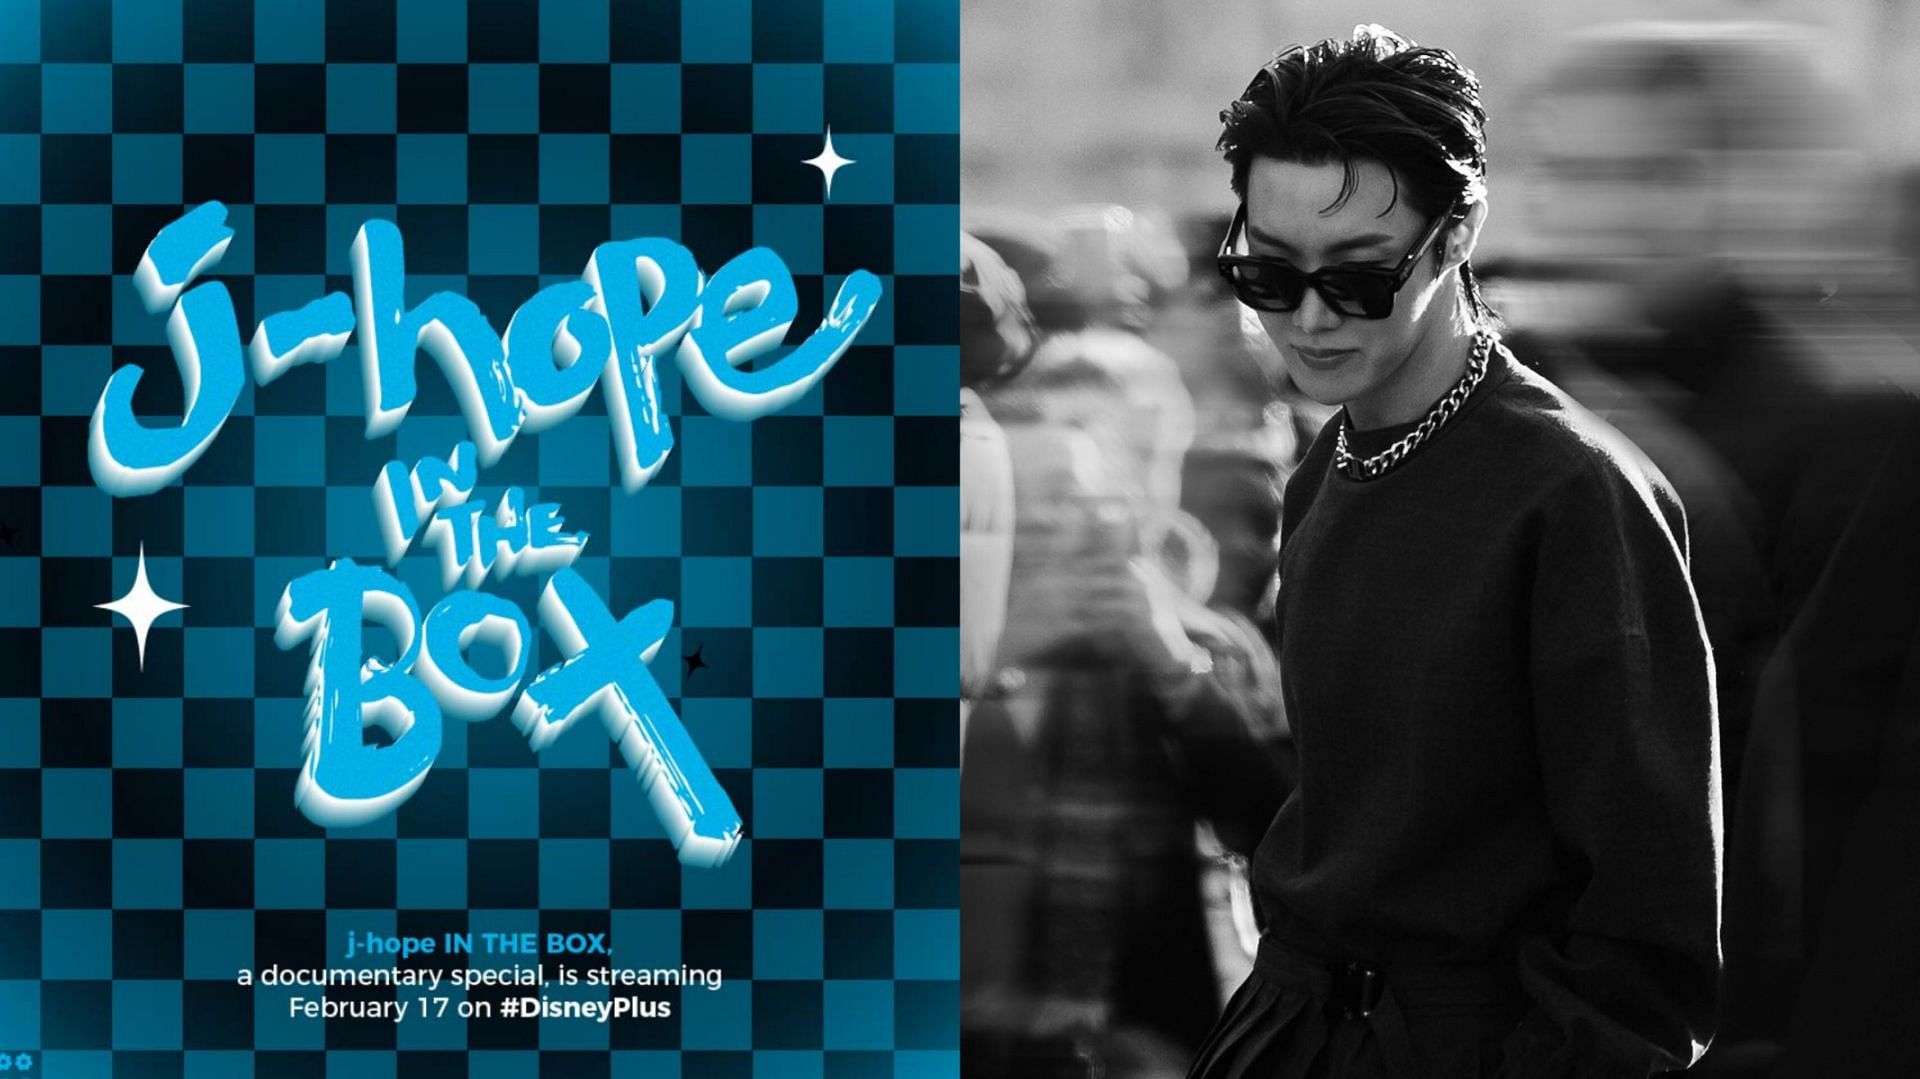 Featuring J-Hope for his solo documentary j-hope IN THE BOX (Image via Disney Plus and Big Hit Entertainment)